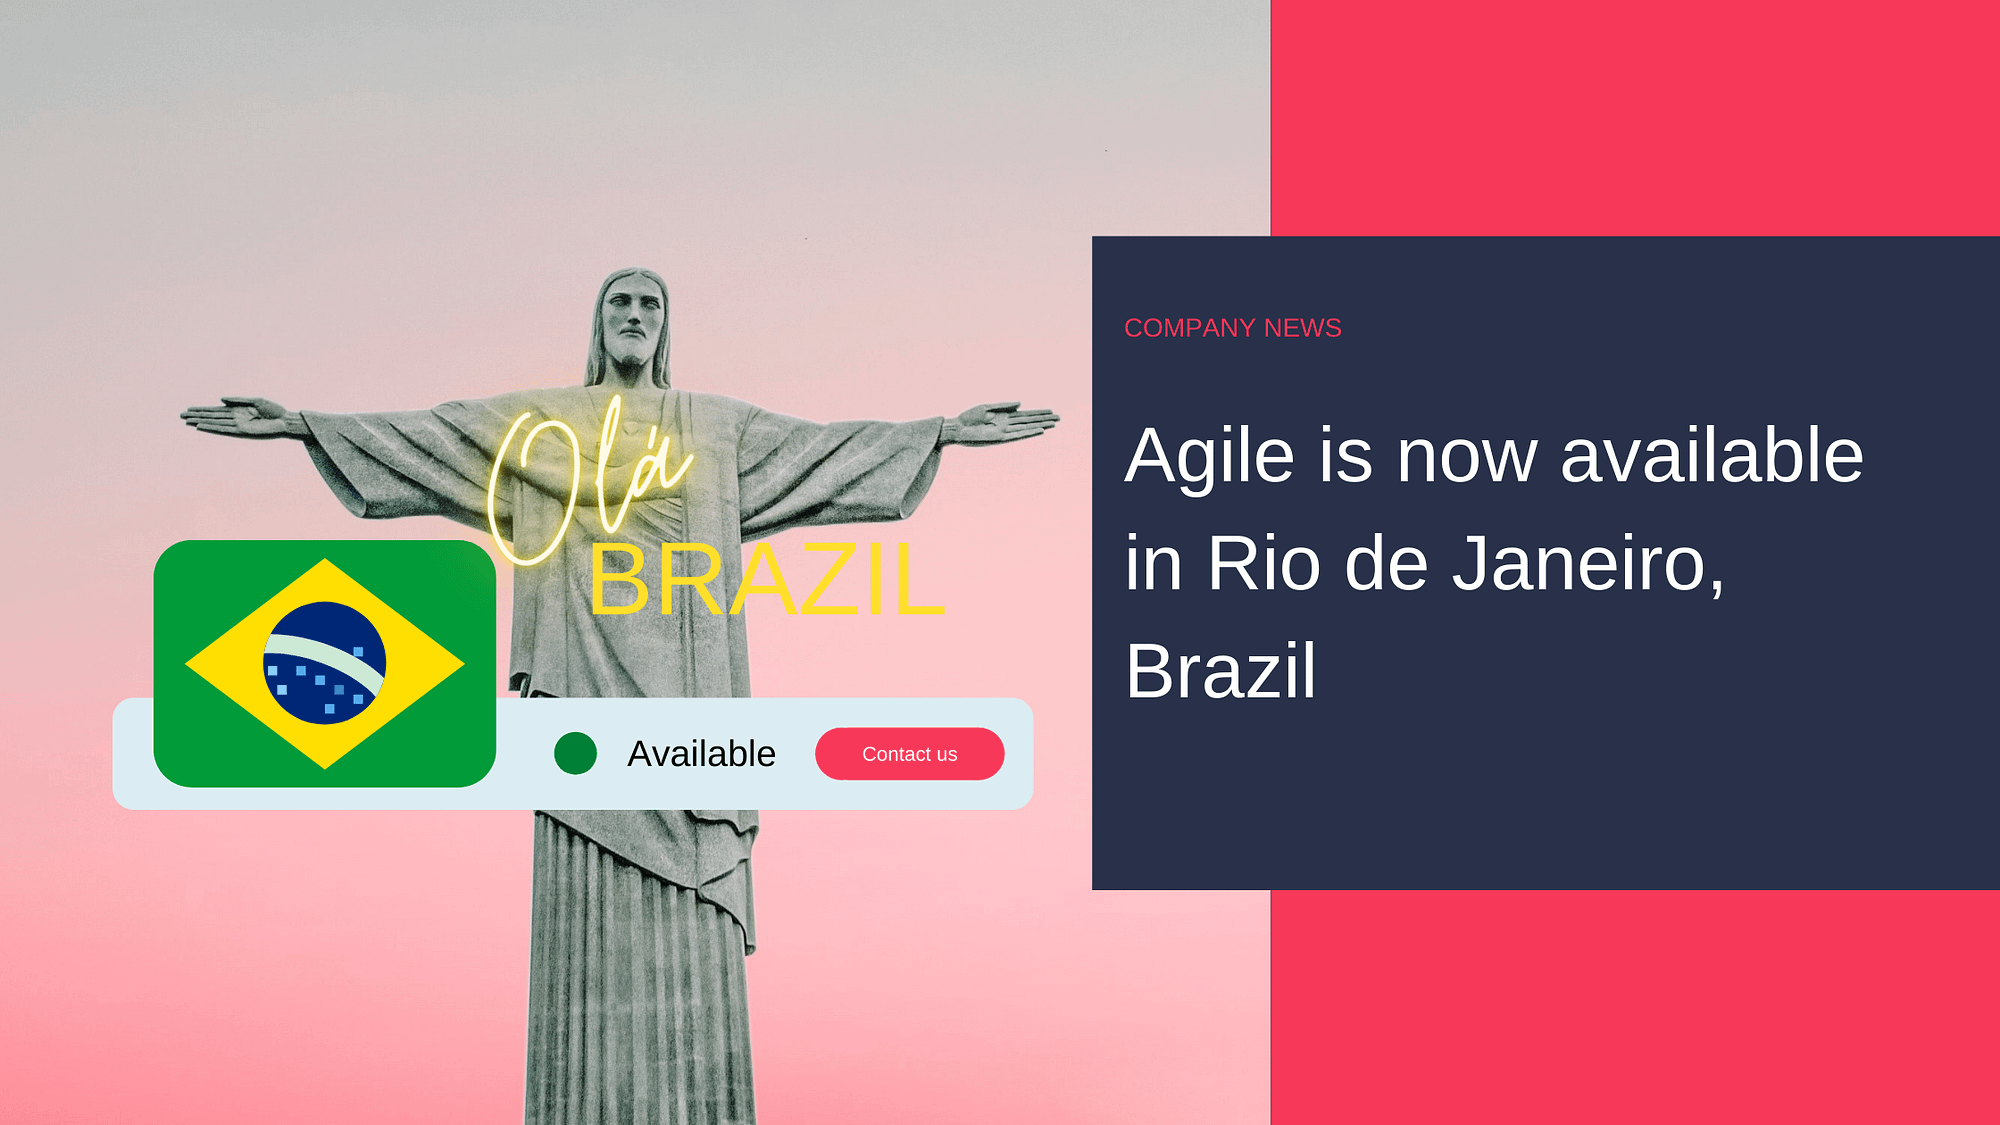 Agile is now available in Brazil